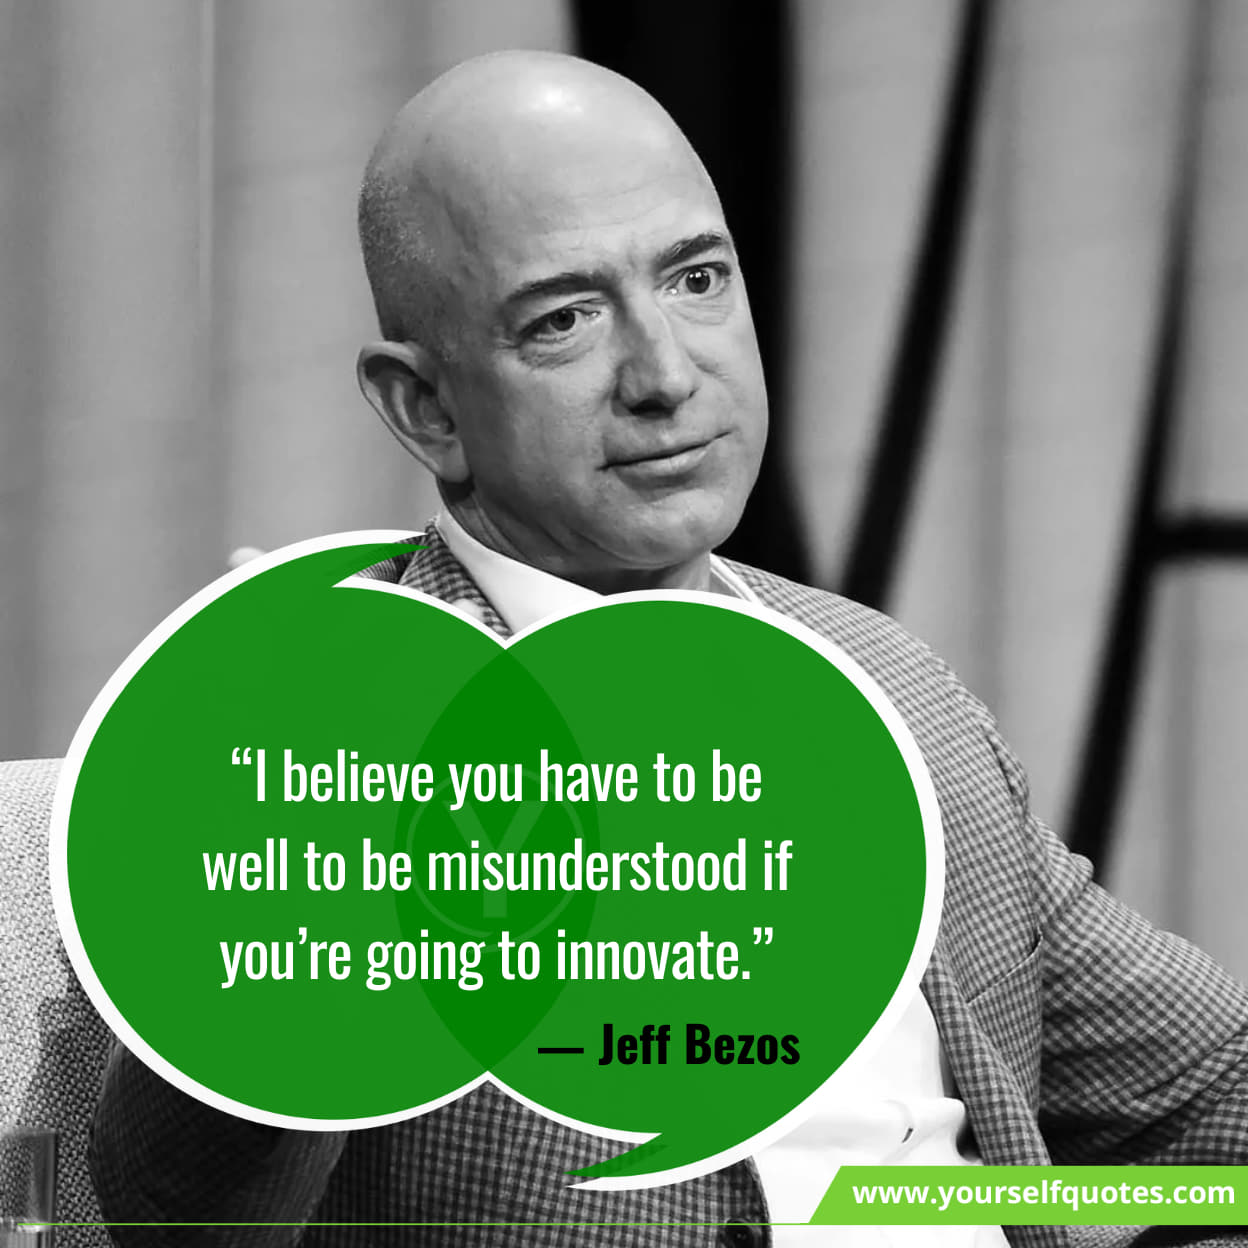 Inspiring Jeff Bezos Quotes For Business